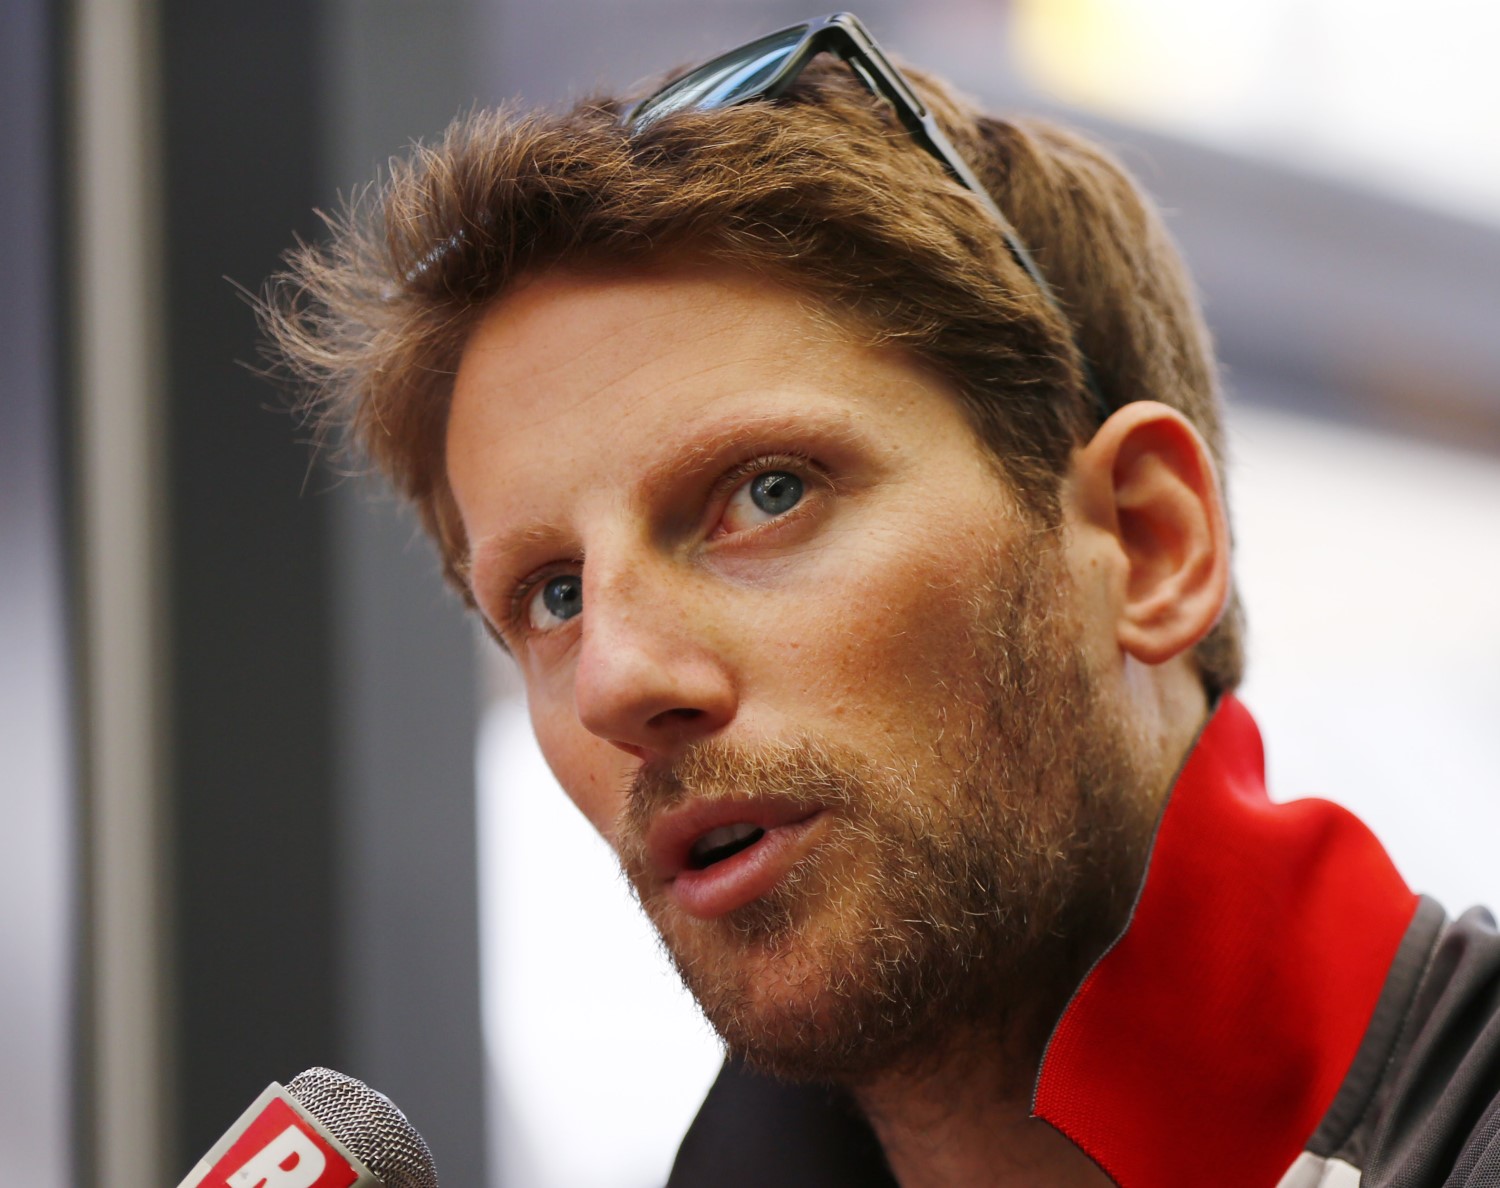 Romain Grosjean knows no other team would take him but the Anti-American Haas team